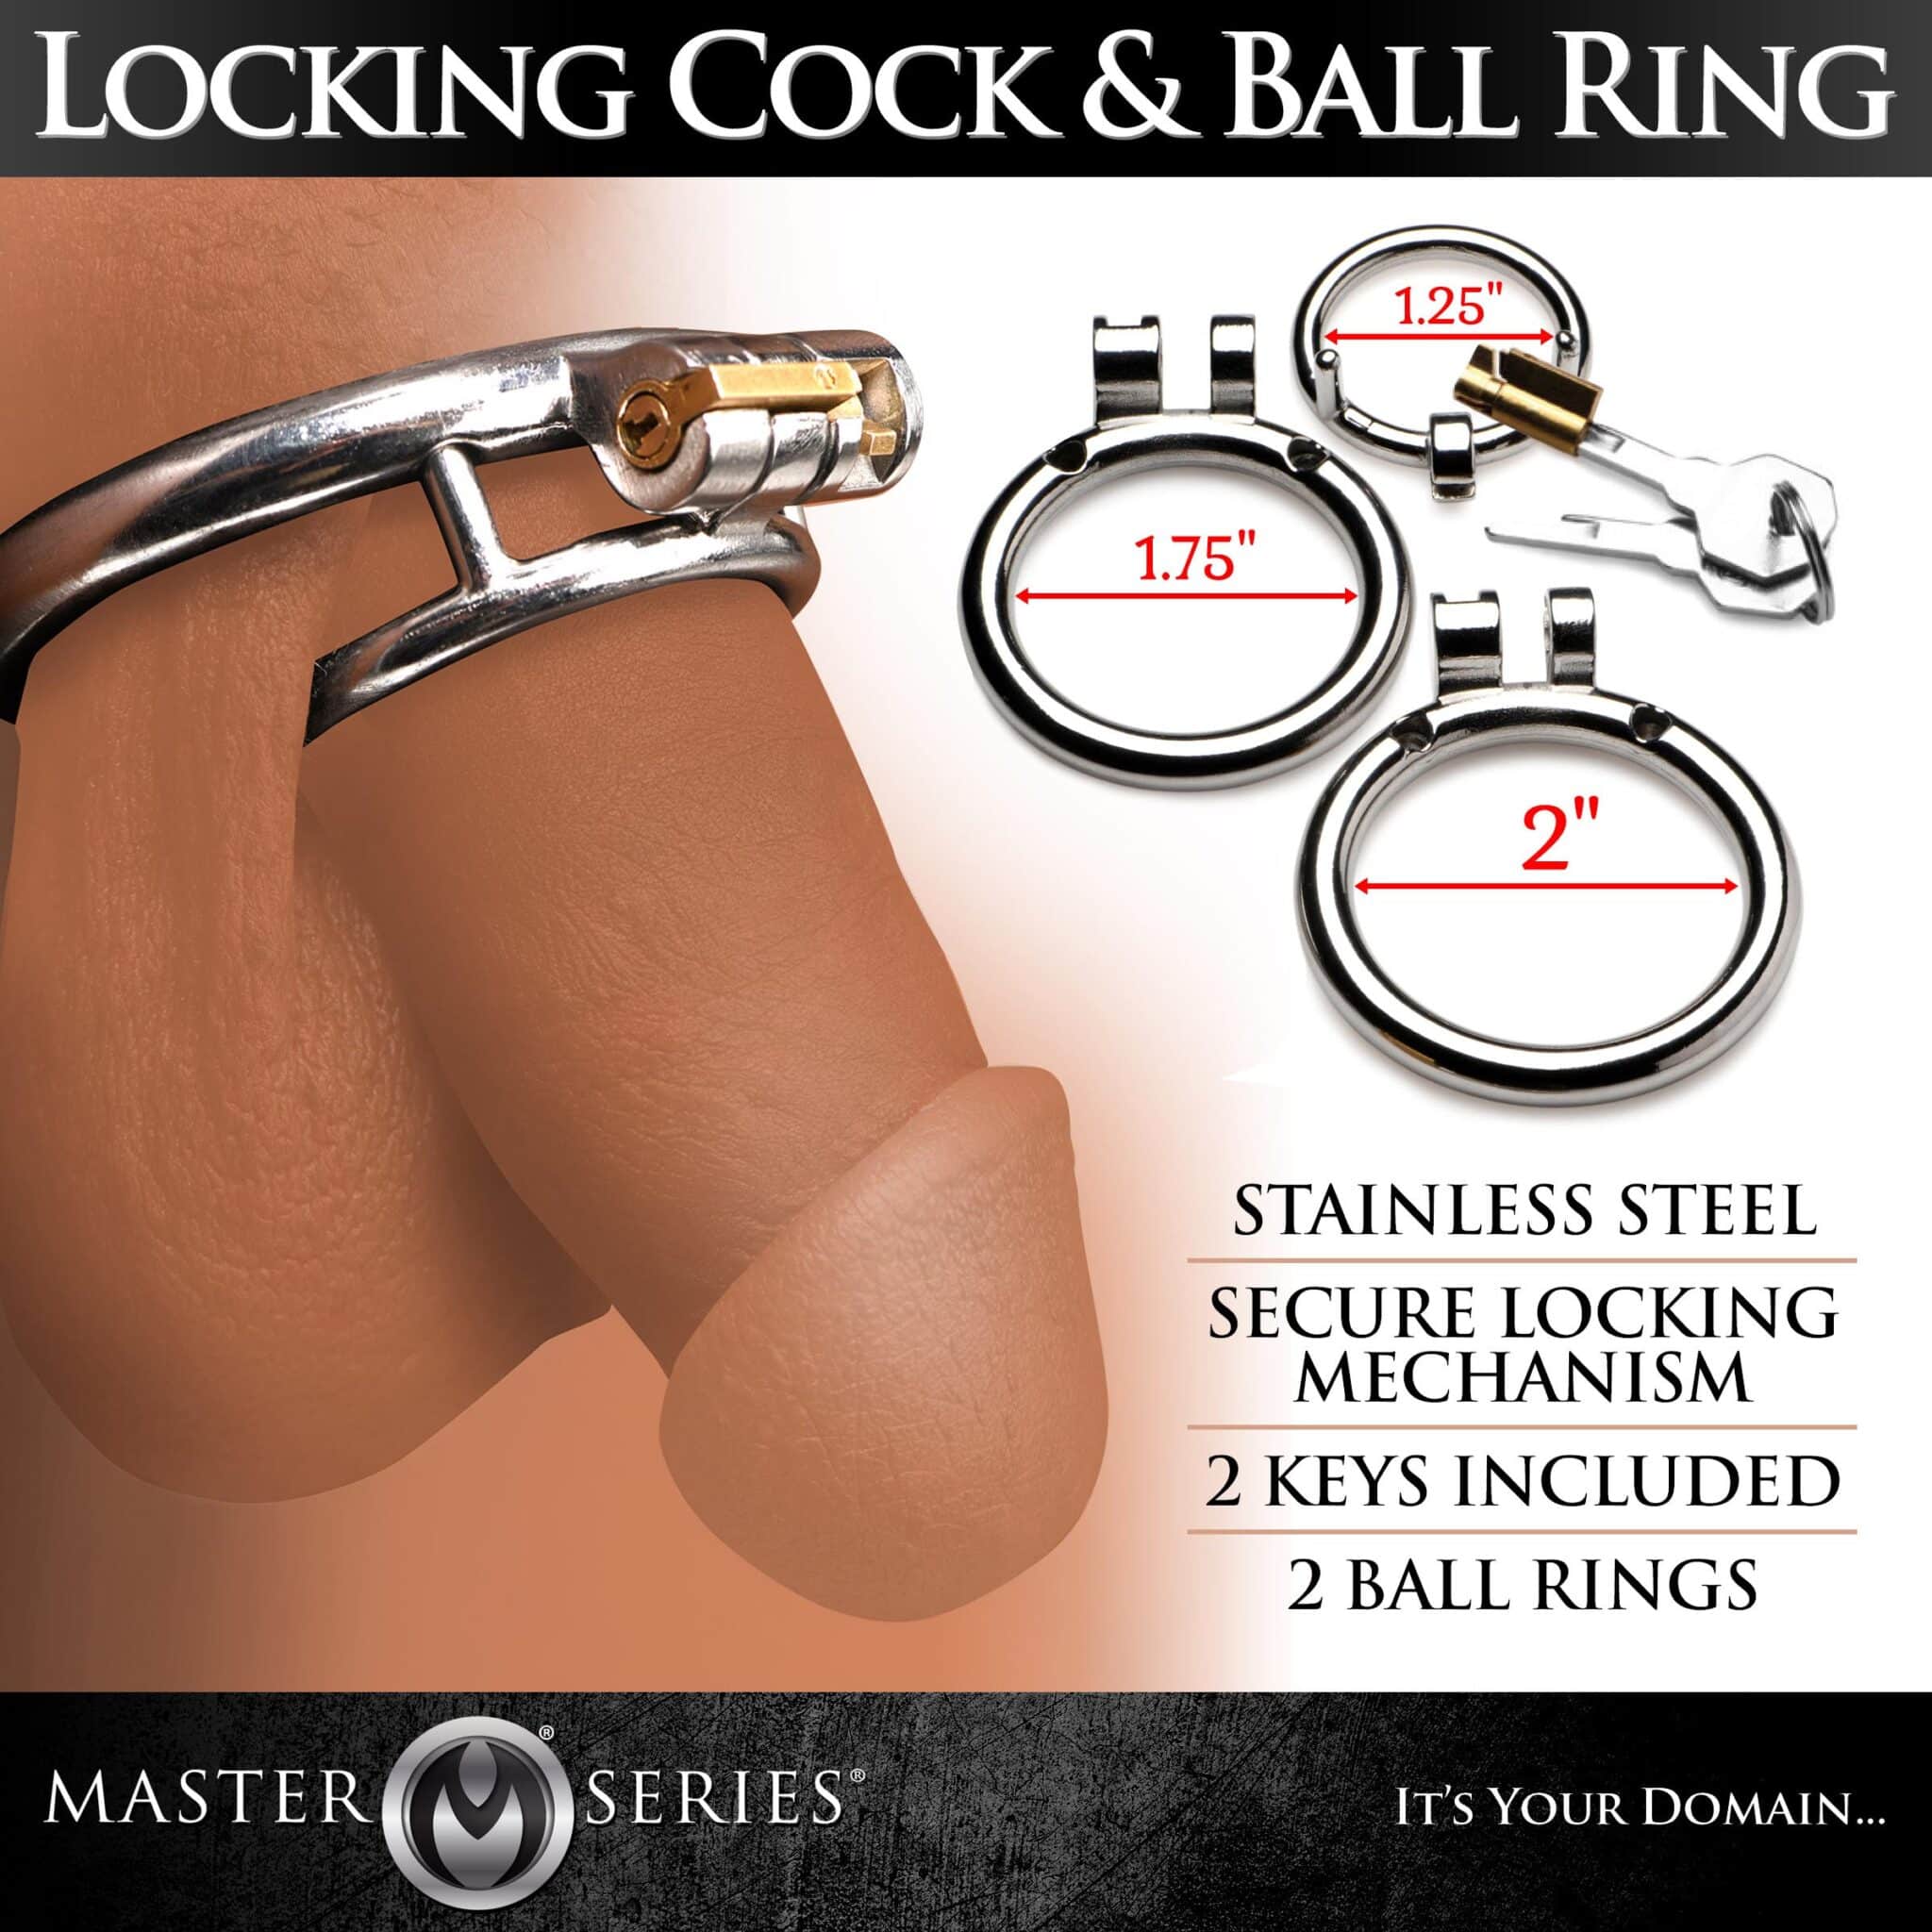 Locking Cock and Ball Ring